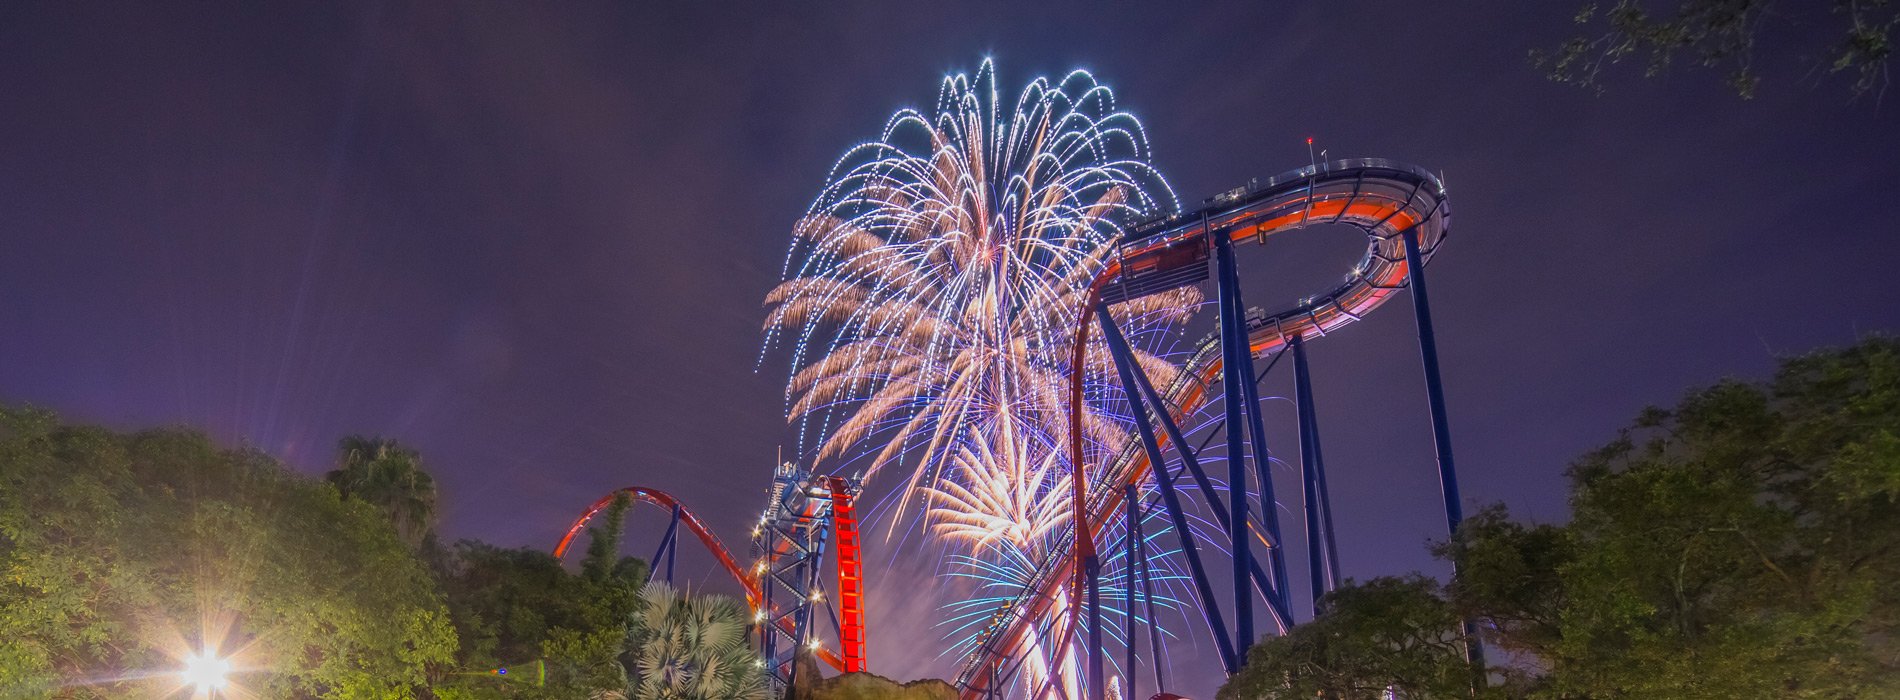 Red, White and Blue Fireworks Over SheiKra